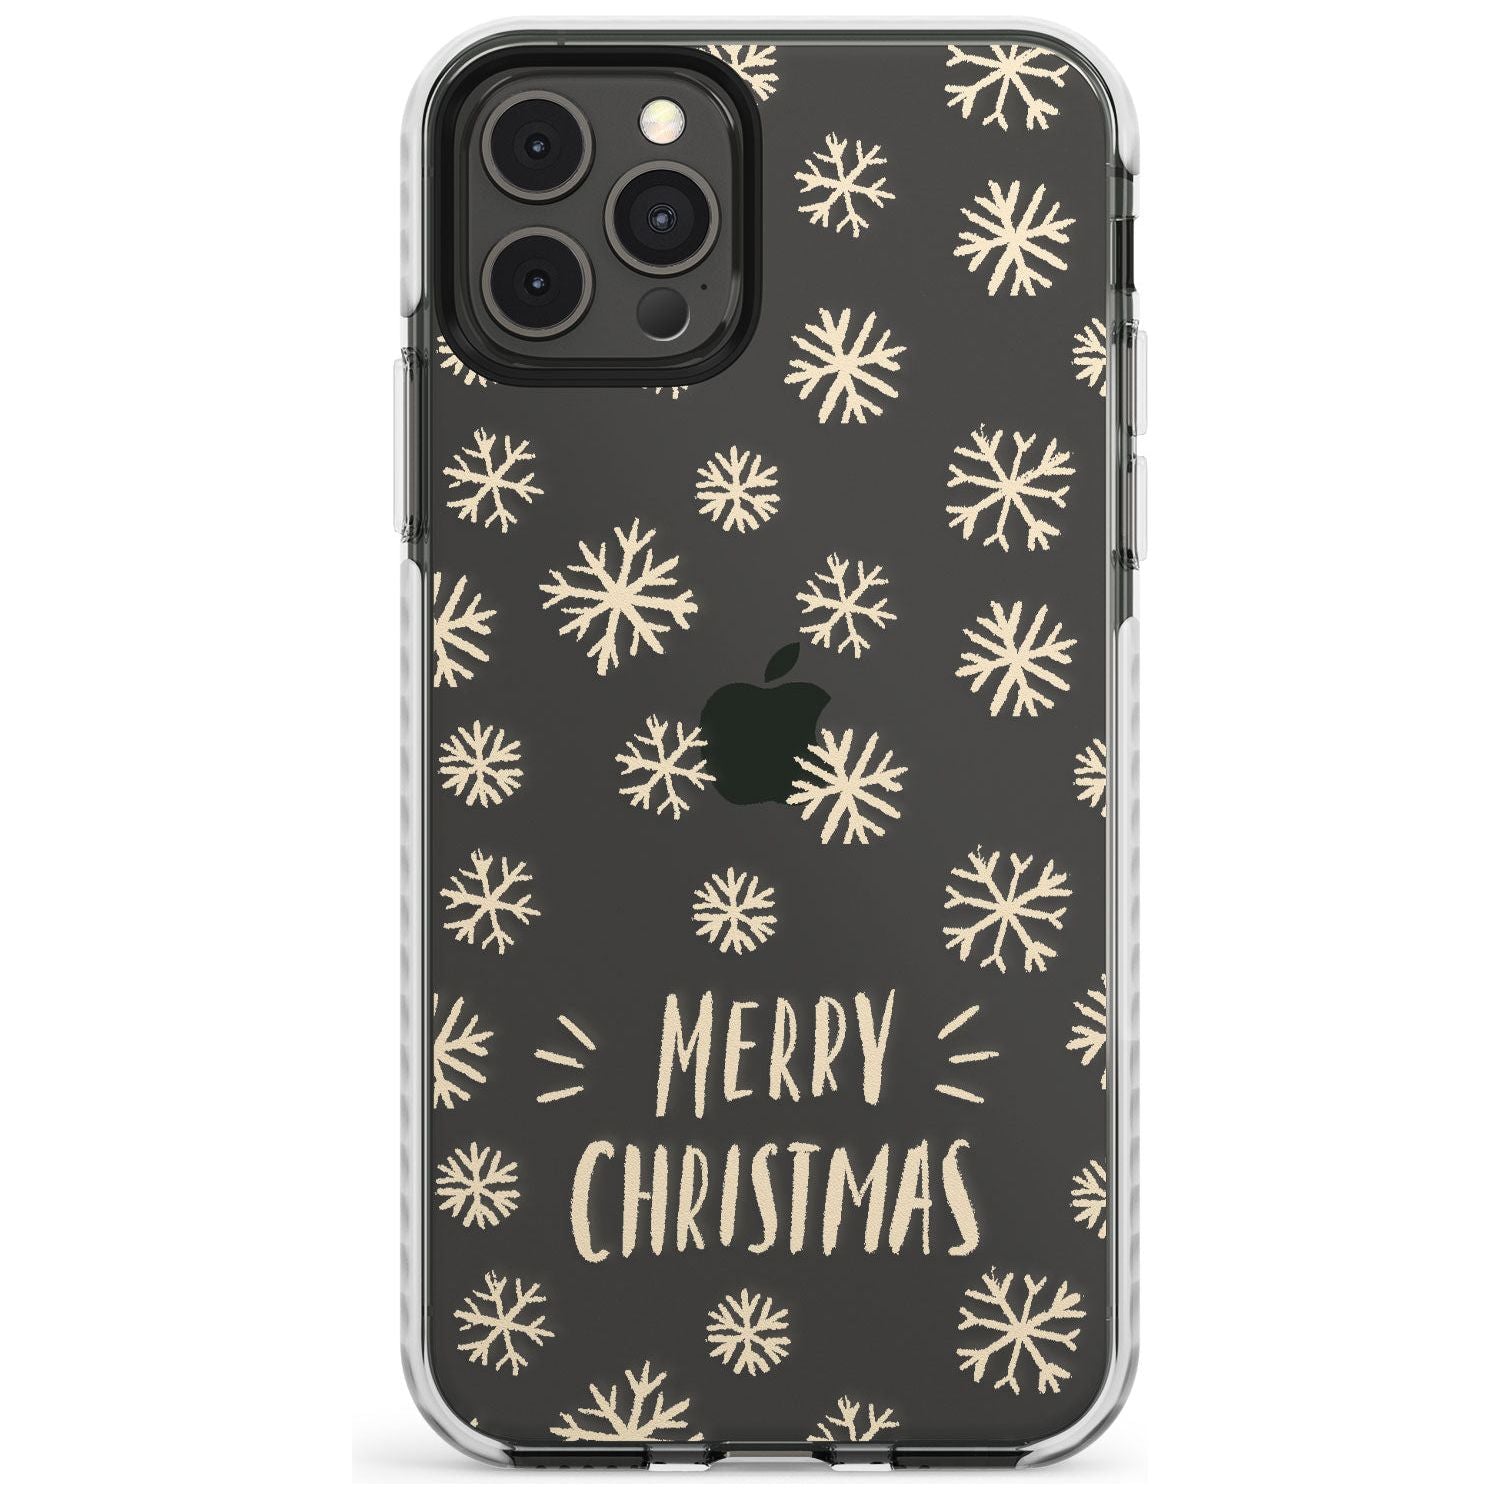 Christmas Snowflake Pattern Impact Phone Case for iPhone 11 Pro Max